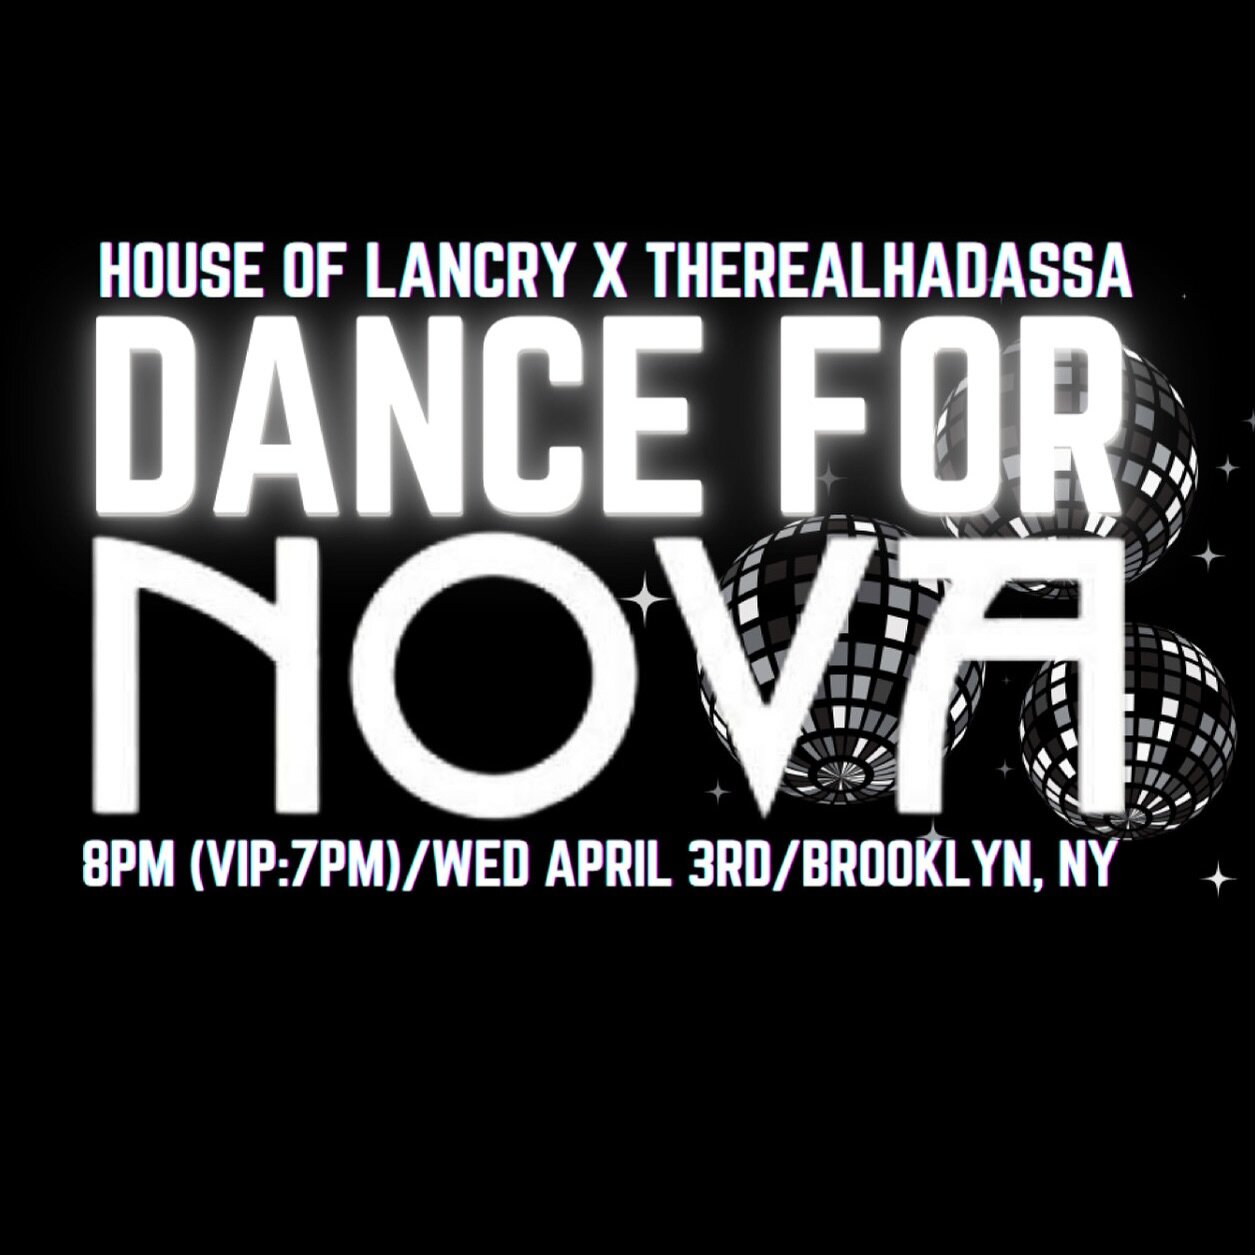 𝐒𝐚𝐯𝐞 𝐭𝐡𝐞 𝐃𝐚𝐭𝐞

DANCE FOR NOVA DANCE FOR ISRAEL 🇮🇱🪩

The Dance Party your soul needs! All proceeds of this evening goes towards our work for the CHAYALIM !! 

@houseoflancry @therealhadassa @v.events_ @shaindysart @byolivebranch

#dancef